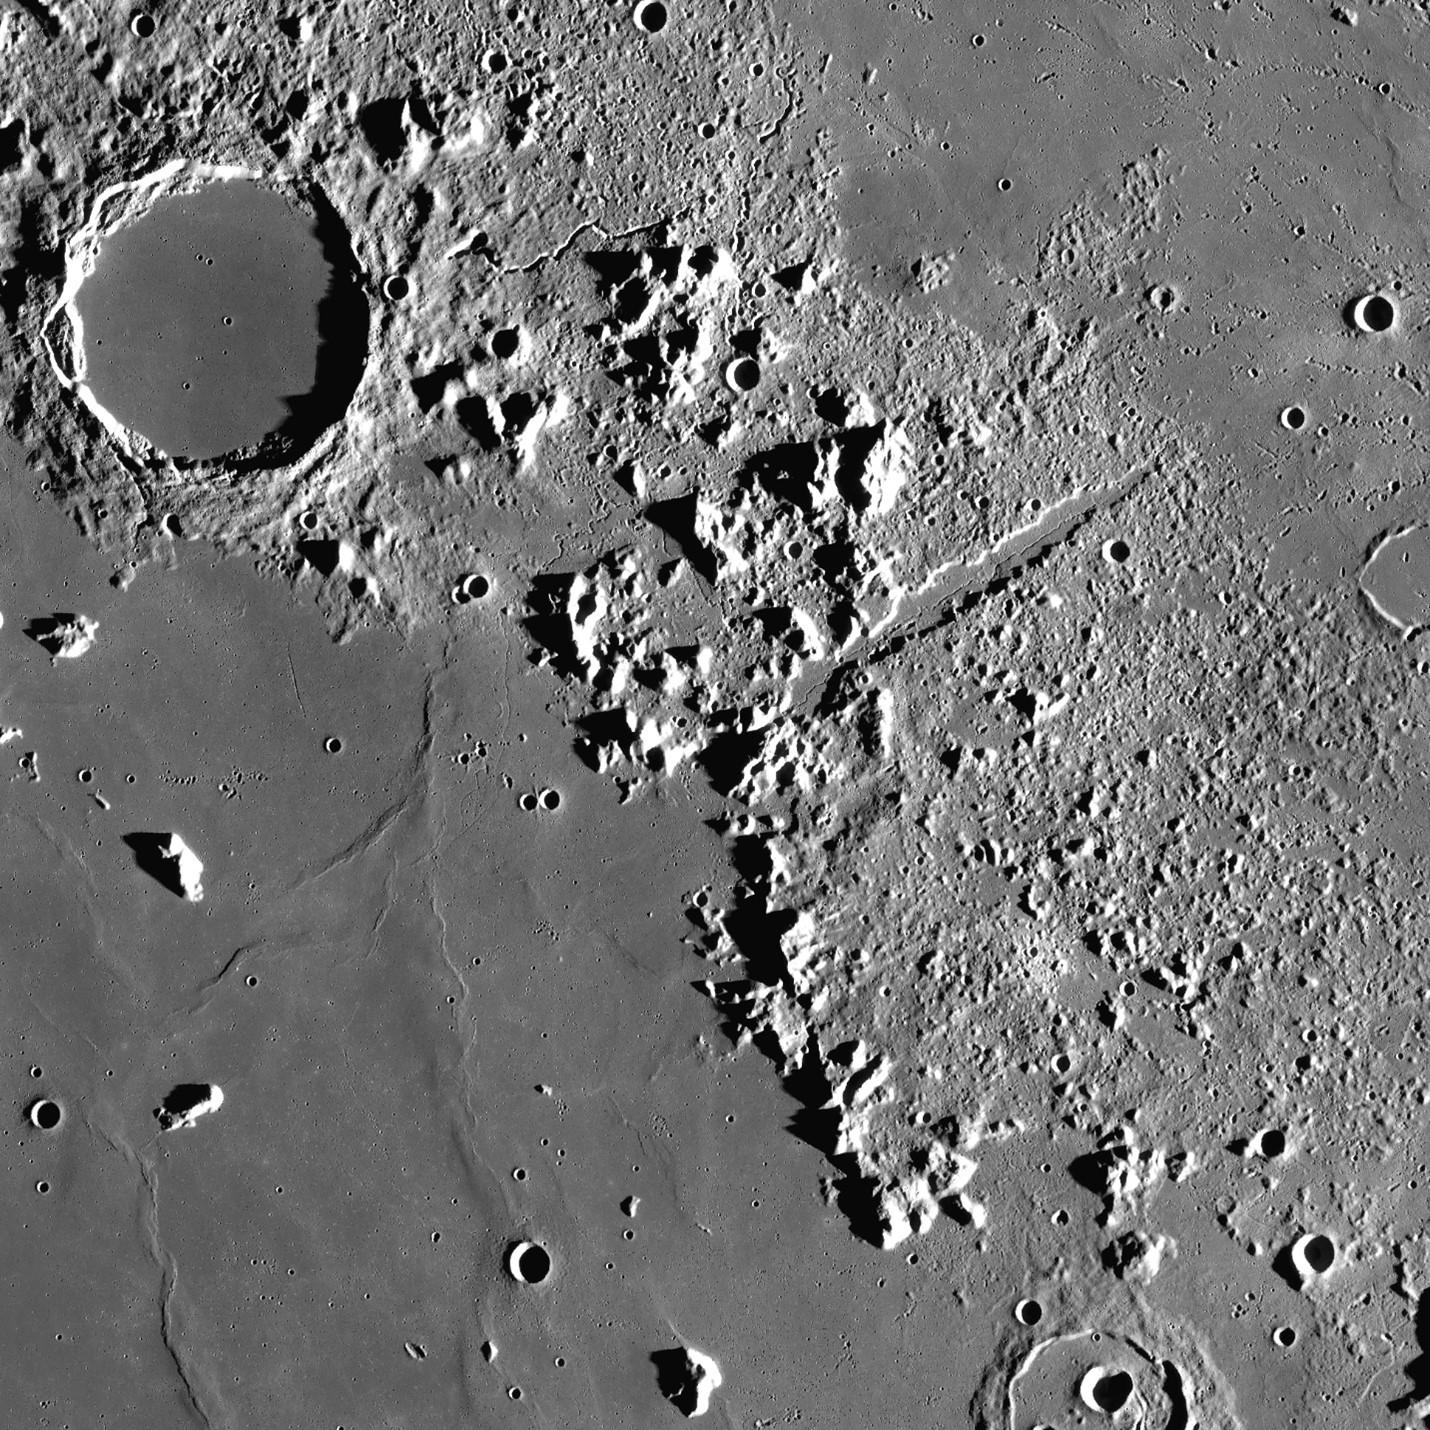 Photo of the lunar surface showing a circular crater and a mountain range